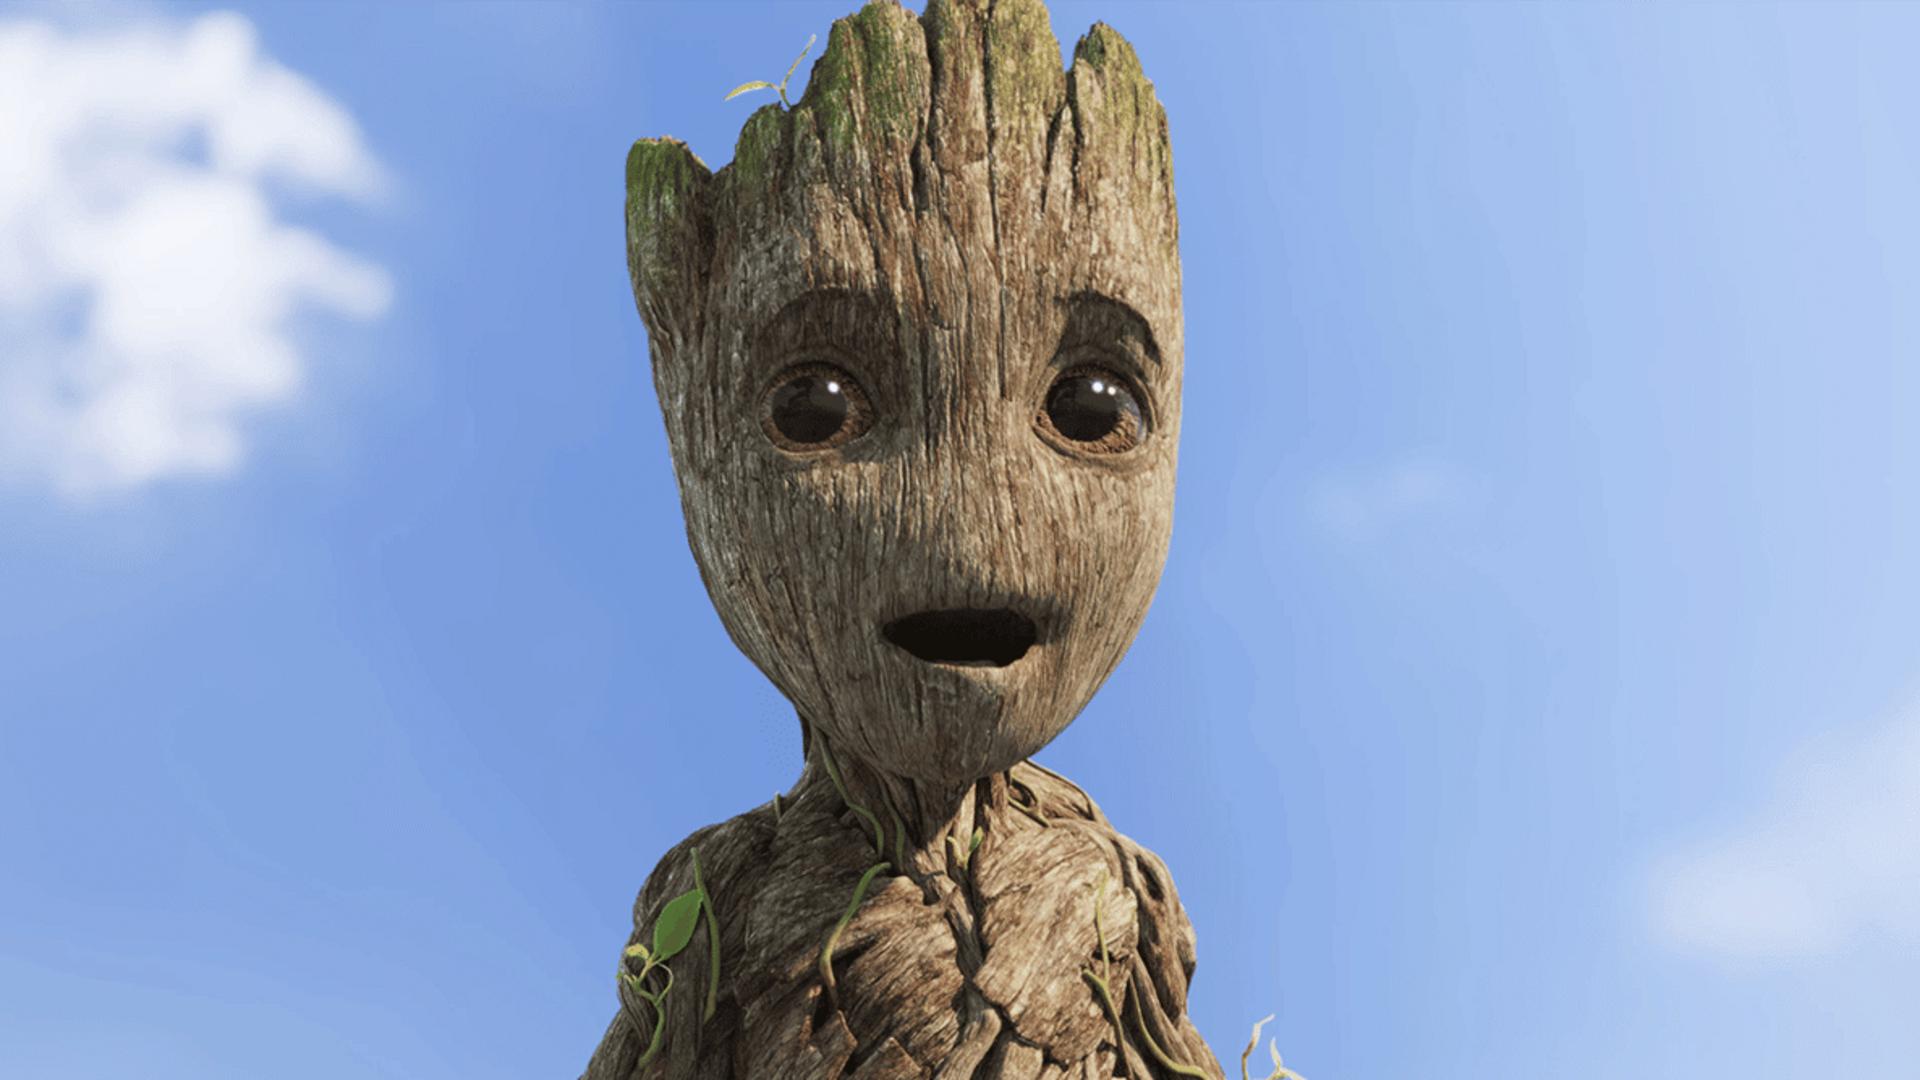 OTT: 'I Am Groot' S02 is streaming now